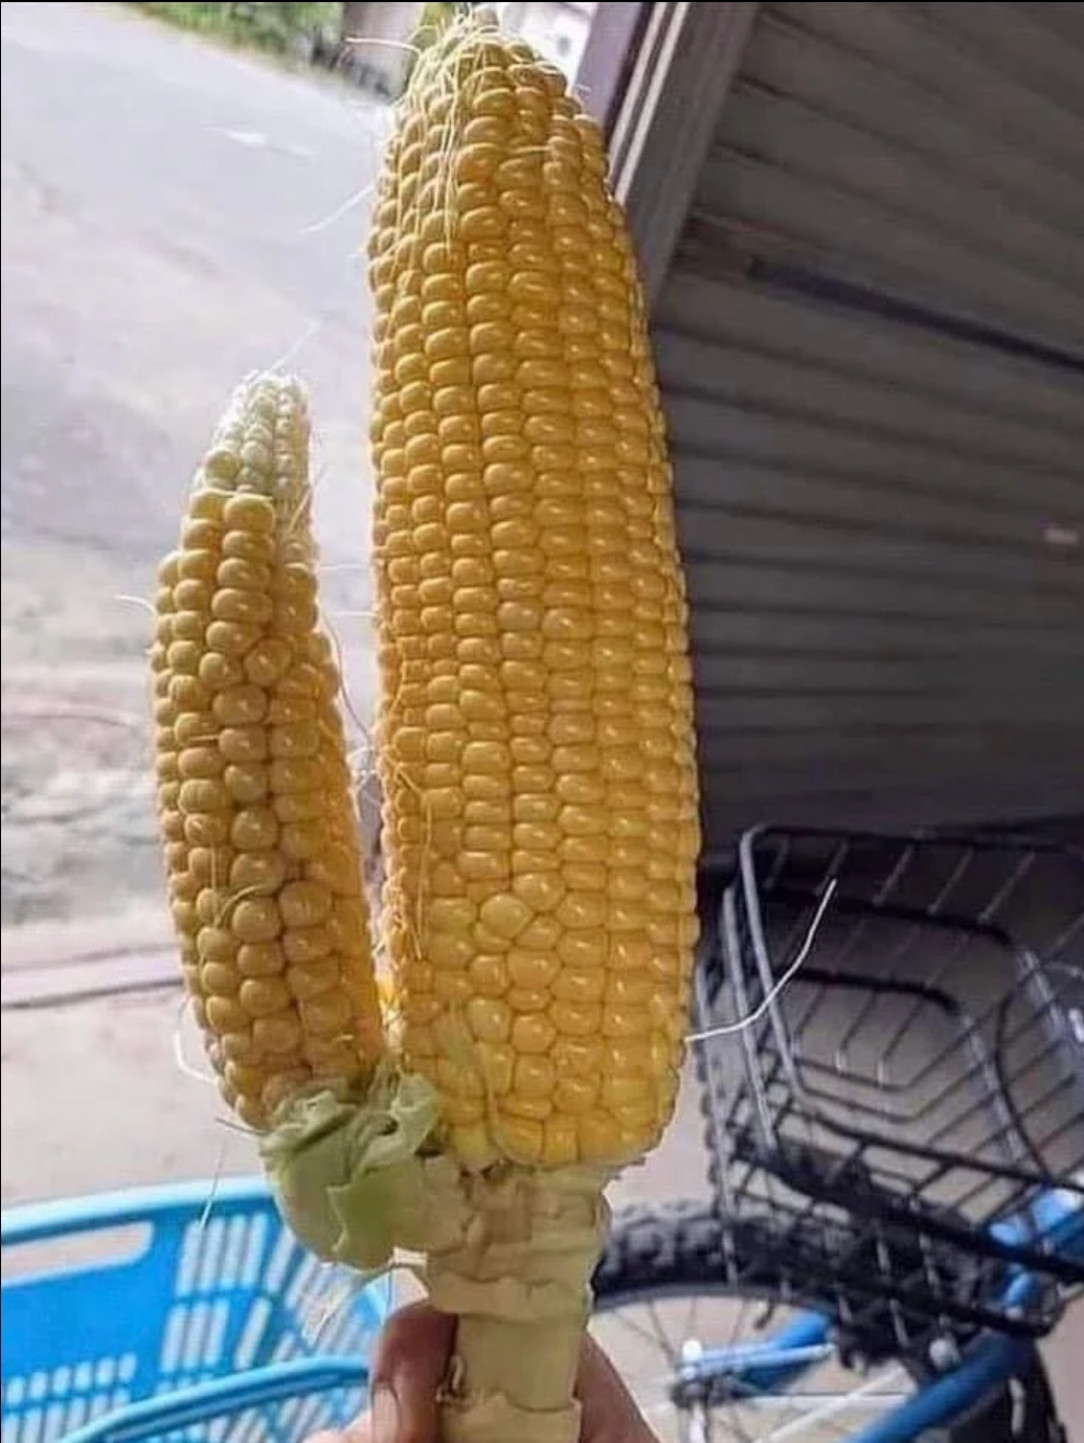 Cornbros, The Guardians of The Field